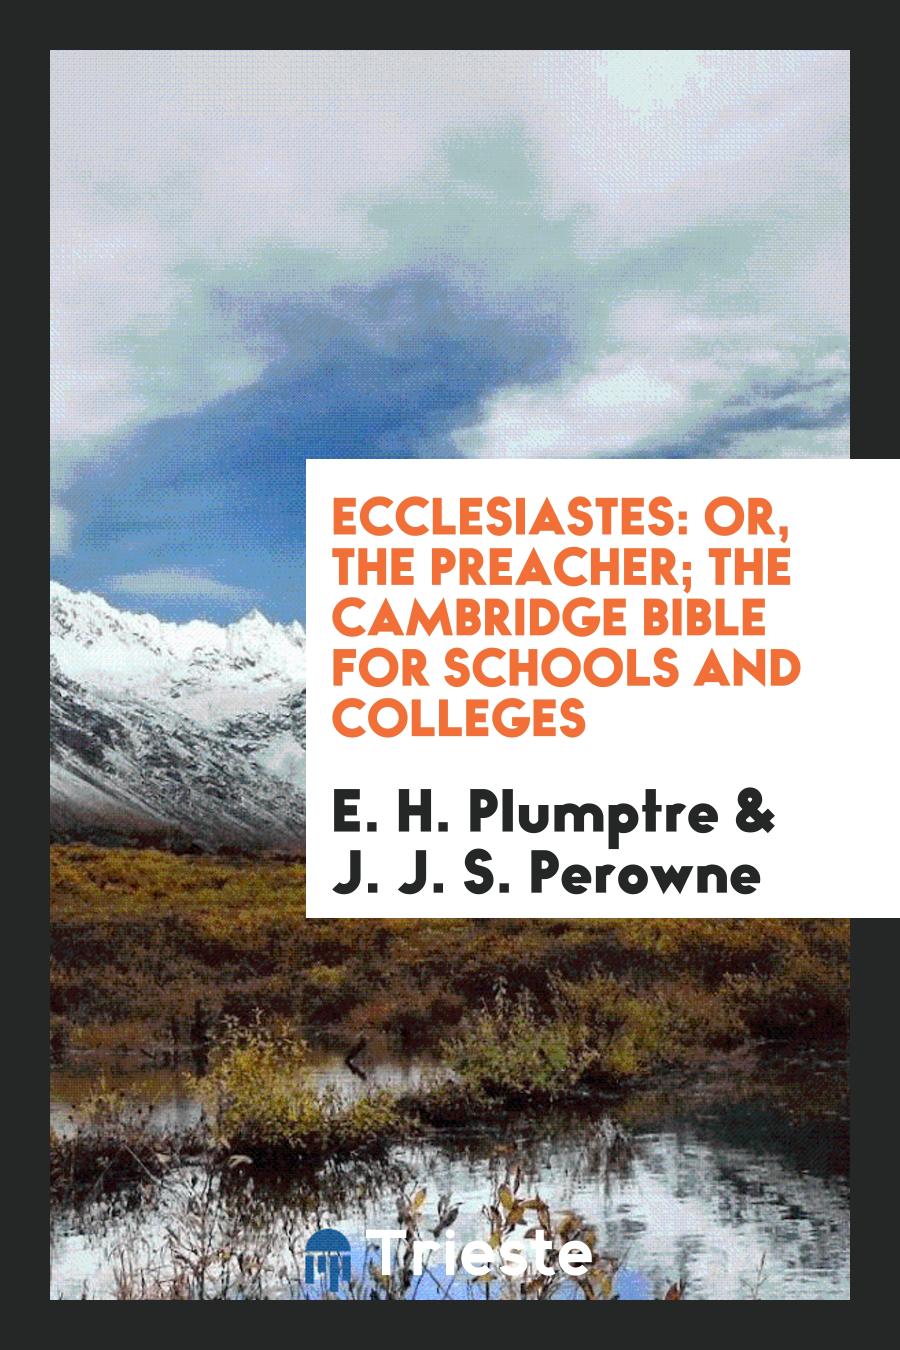 E. H. Plumptre, J. J. S. Perowne - Ecclesiastes: Or, The Preacher; The Cambridge Bible for Schools and Colleges